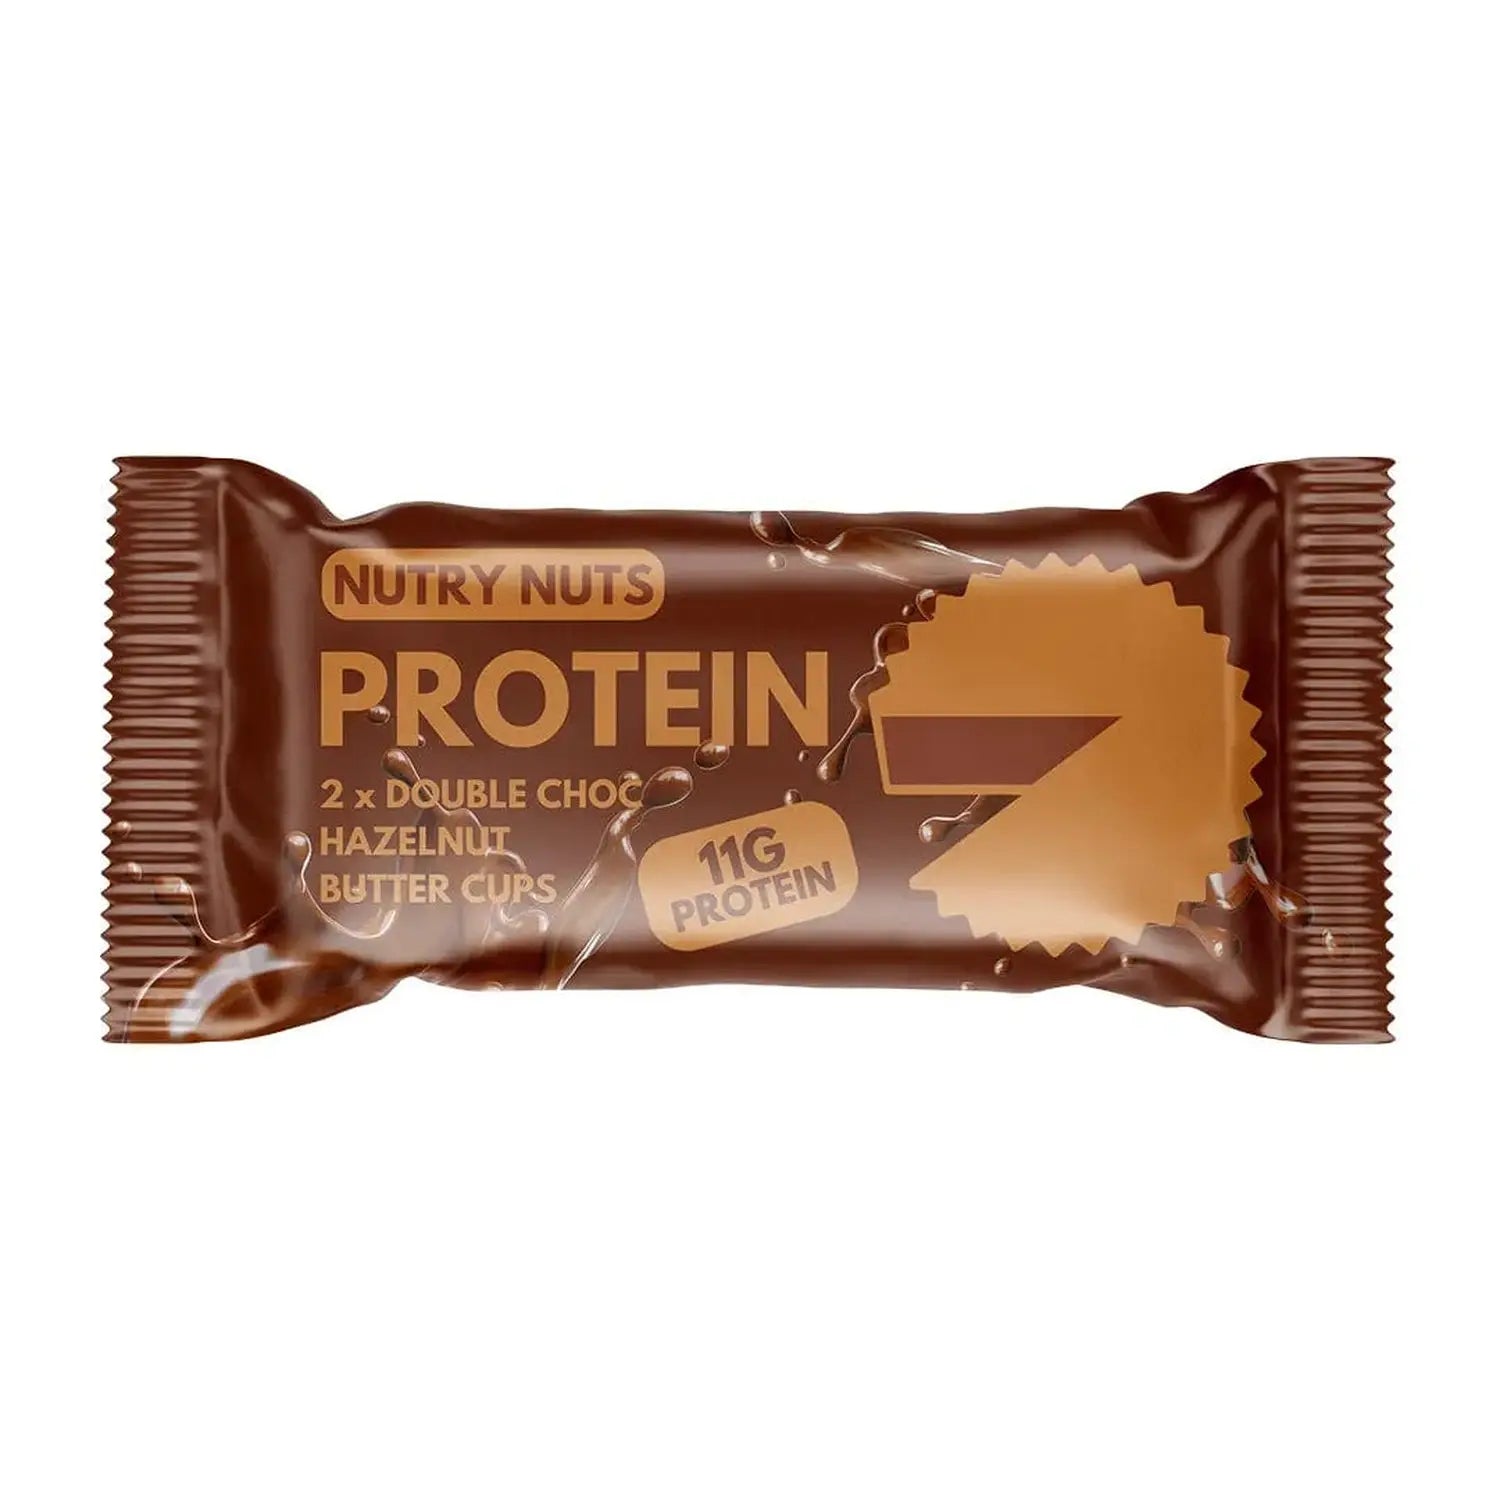 Nutry Nuts Nutry Nuts - Protein Peanut Butter Cups 42 g Double Chocolate Hazelnut kaufen bei HighPowered.ch